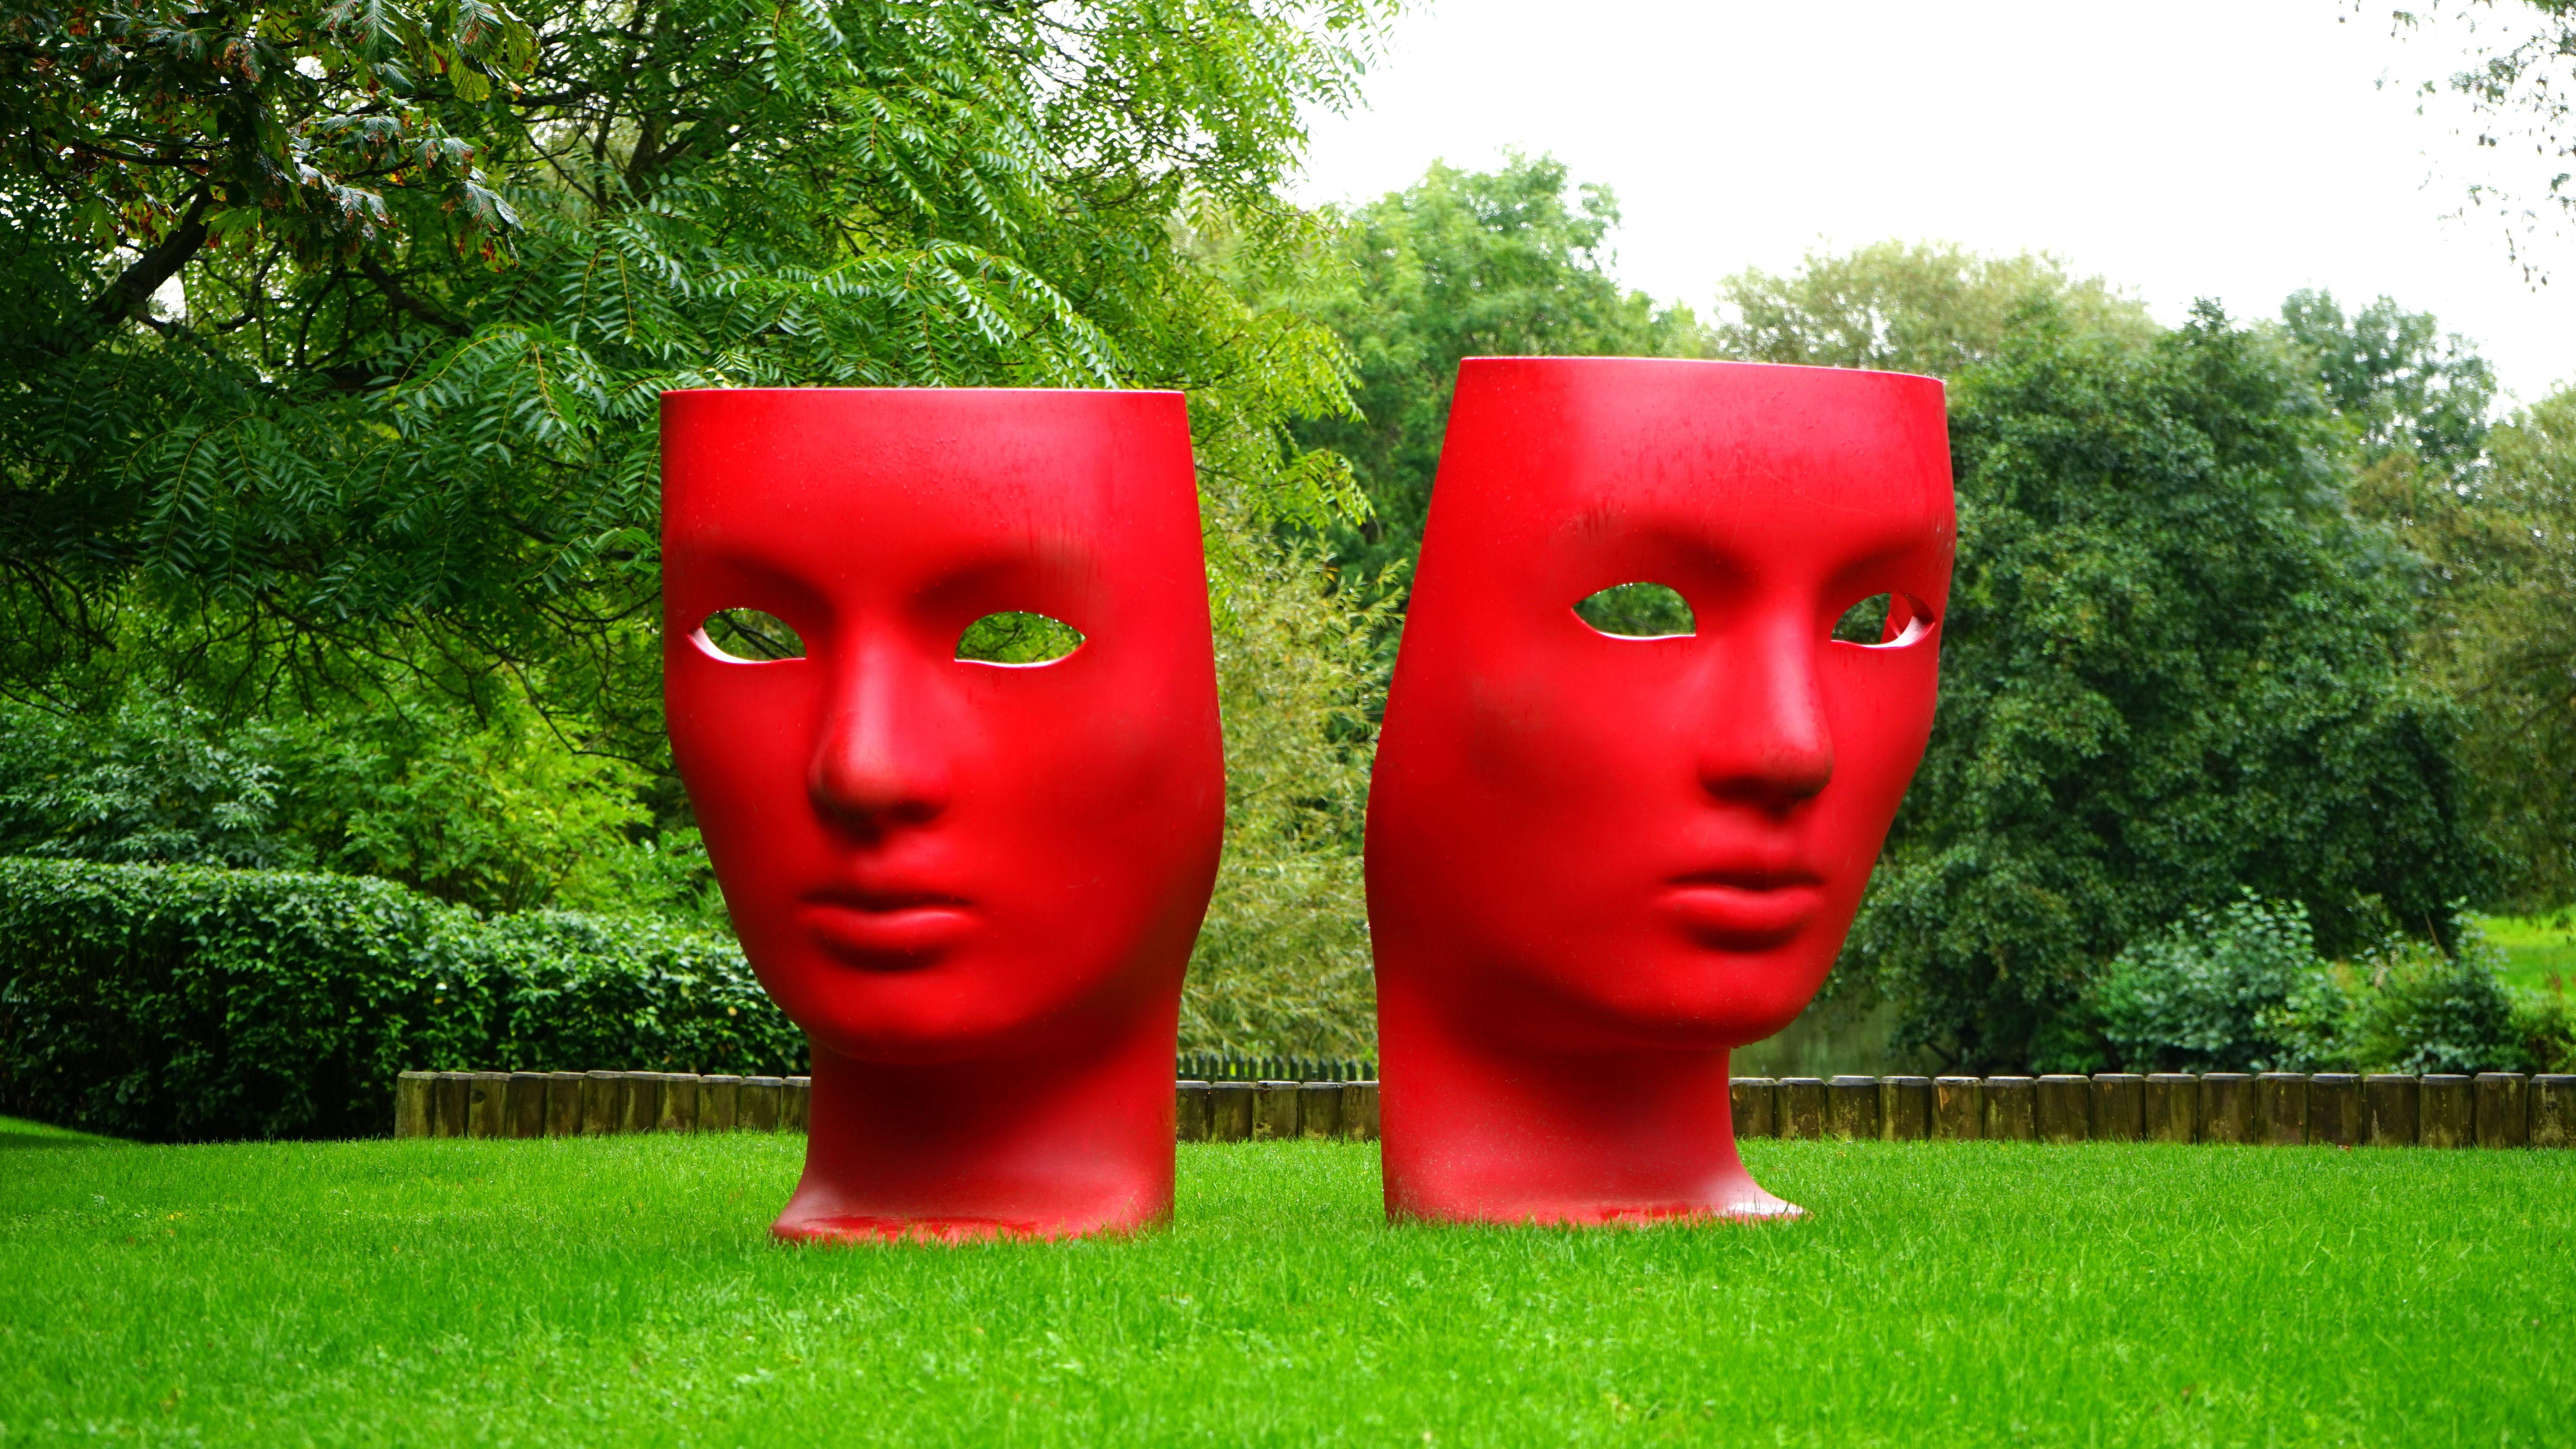 Red Face Statue Logo - Red Human Face Monument on Green Grass Field · Free Stock Photo